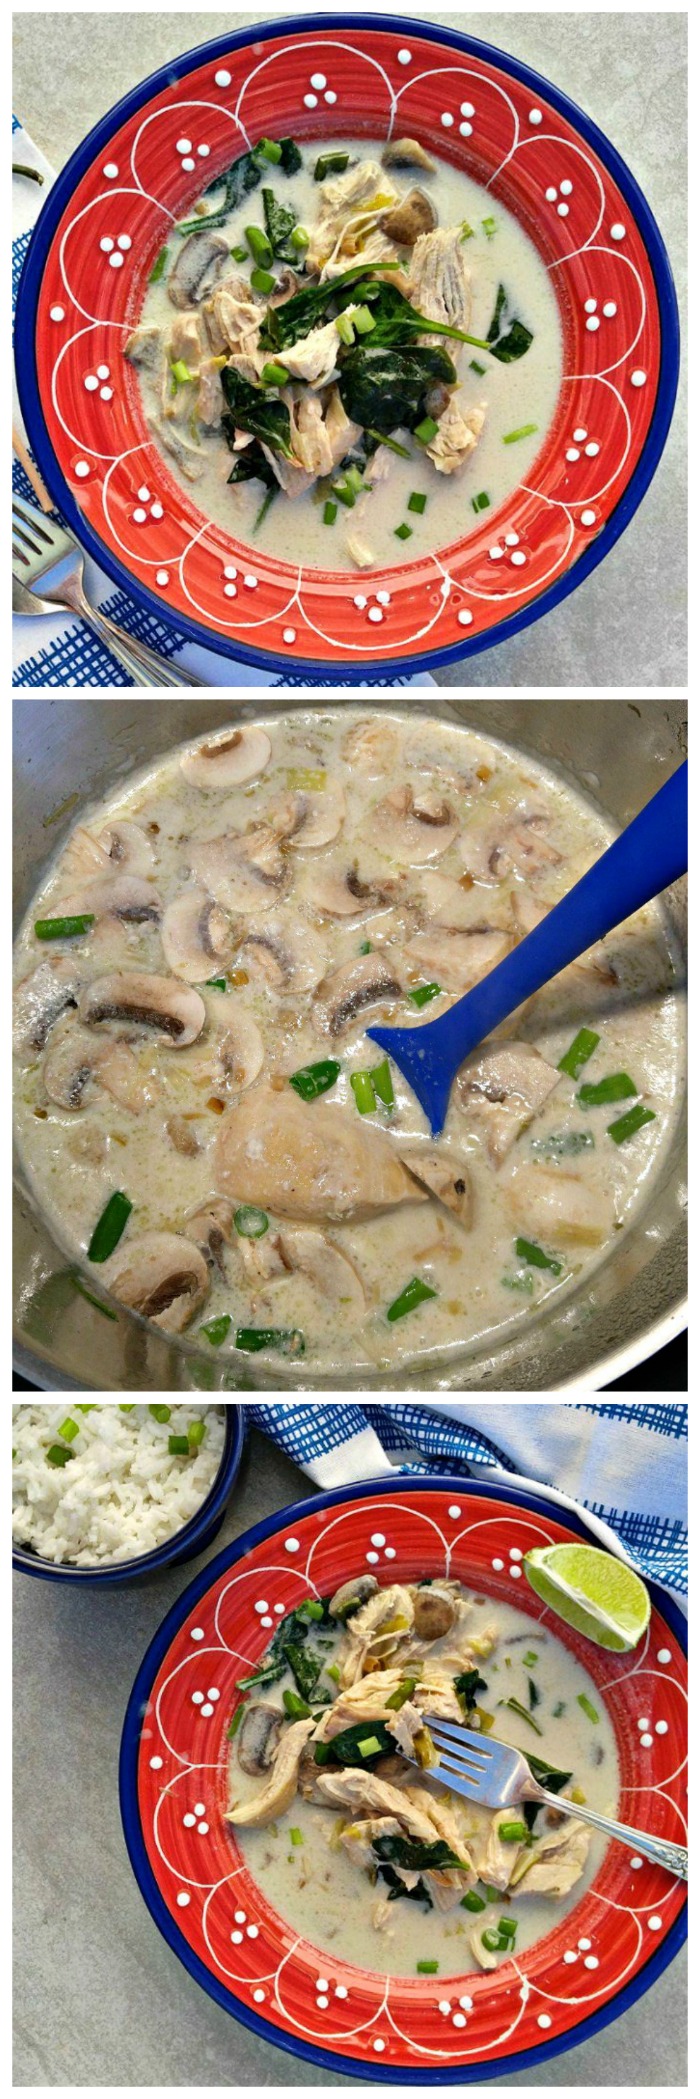 This Thai Chicken Coconut Soup is sweet, salty, sour and spicy, all in one spoonful. It is also known as tom kha gai. #tomkhagai #thaisouprecipe